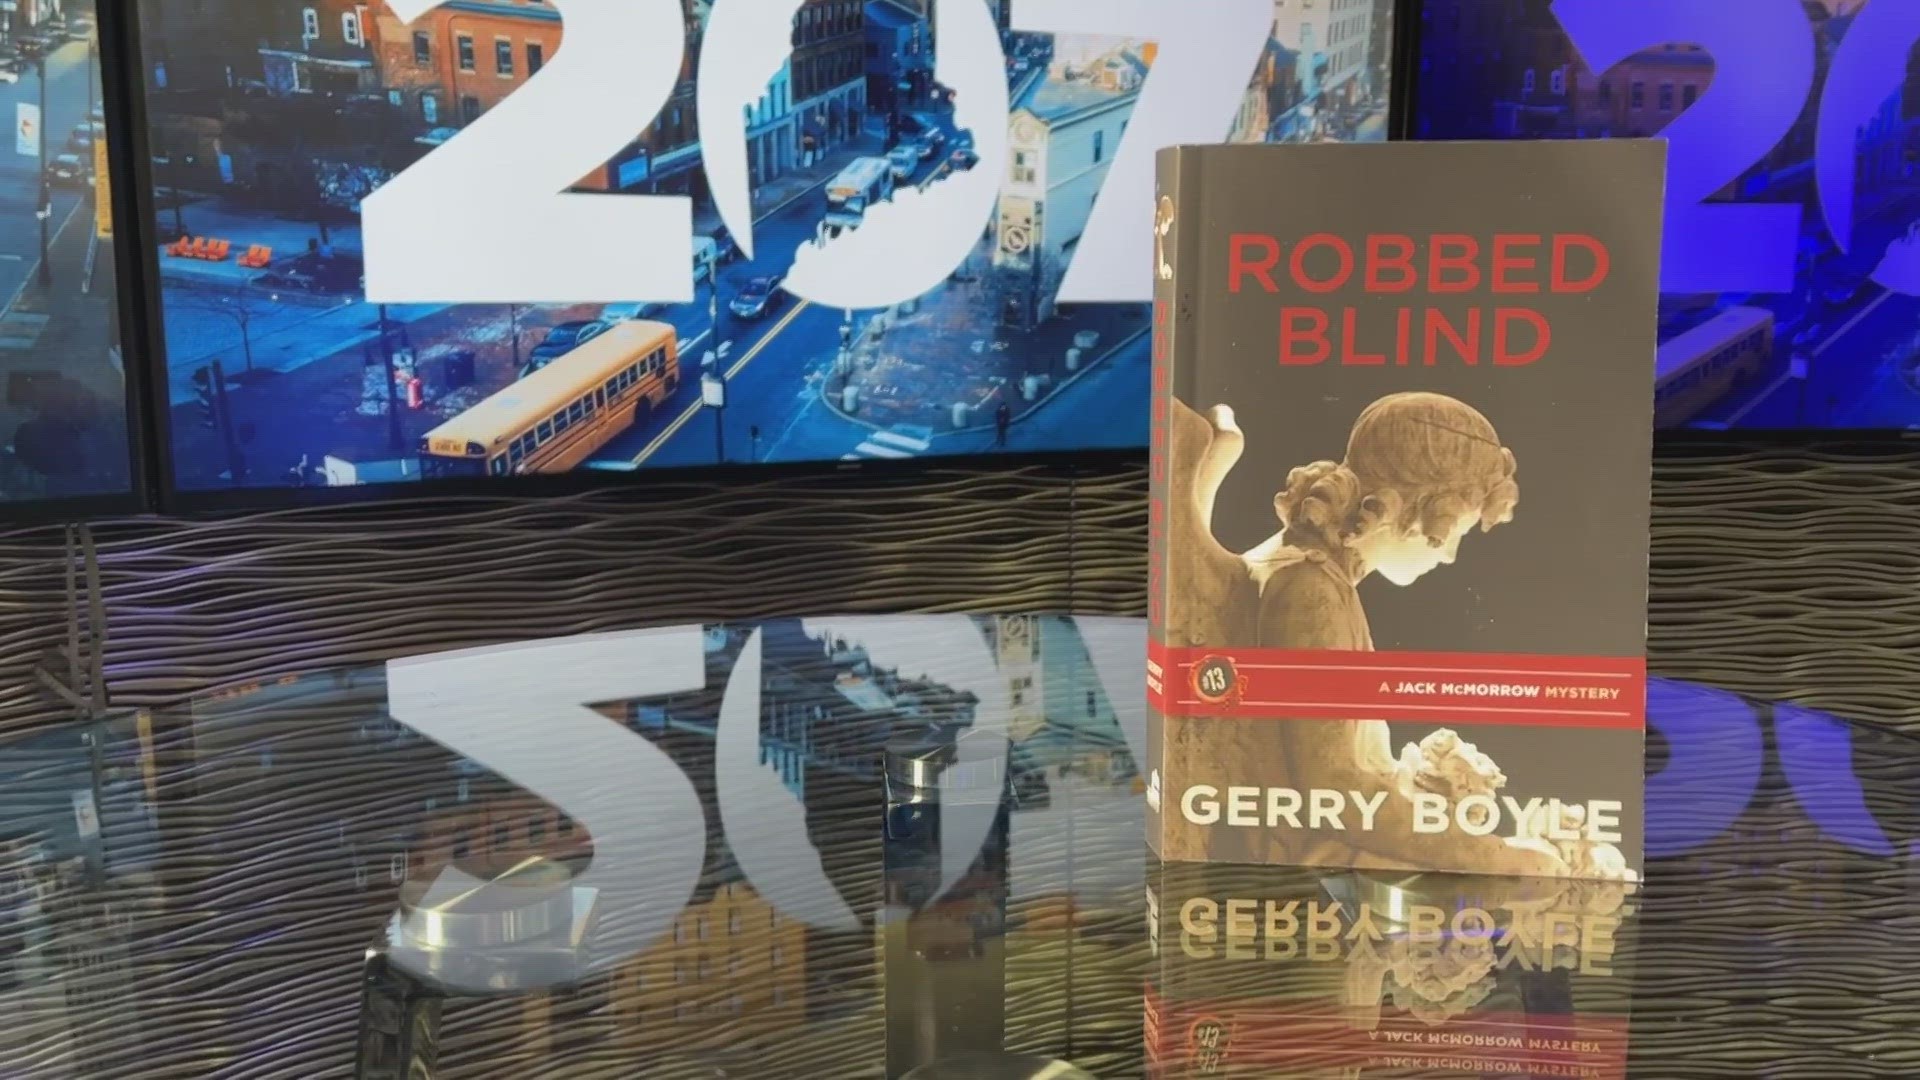 Author Gerry Boyle, getting ready to wrap up a popular series, wants to go out near the top of his game